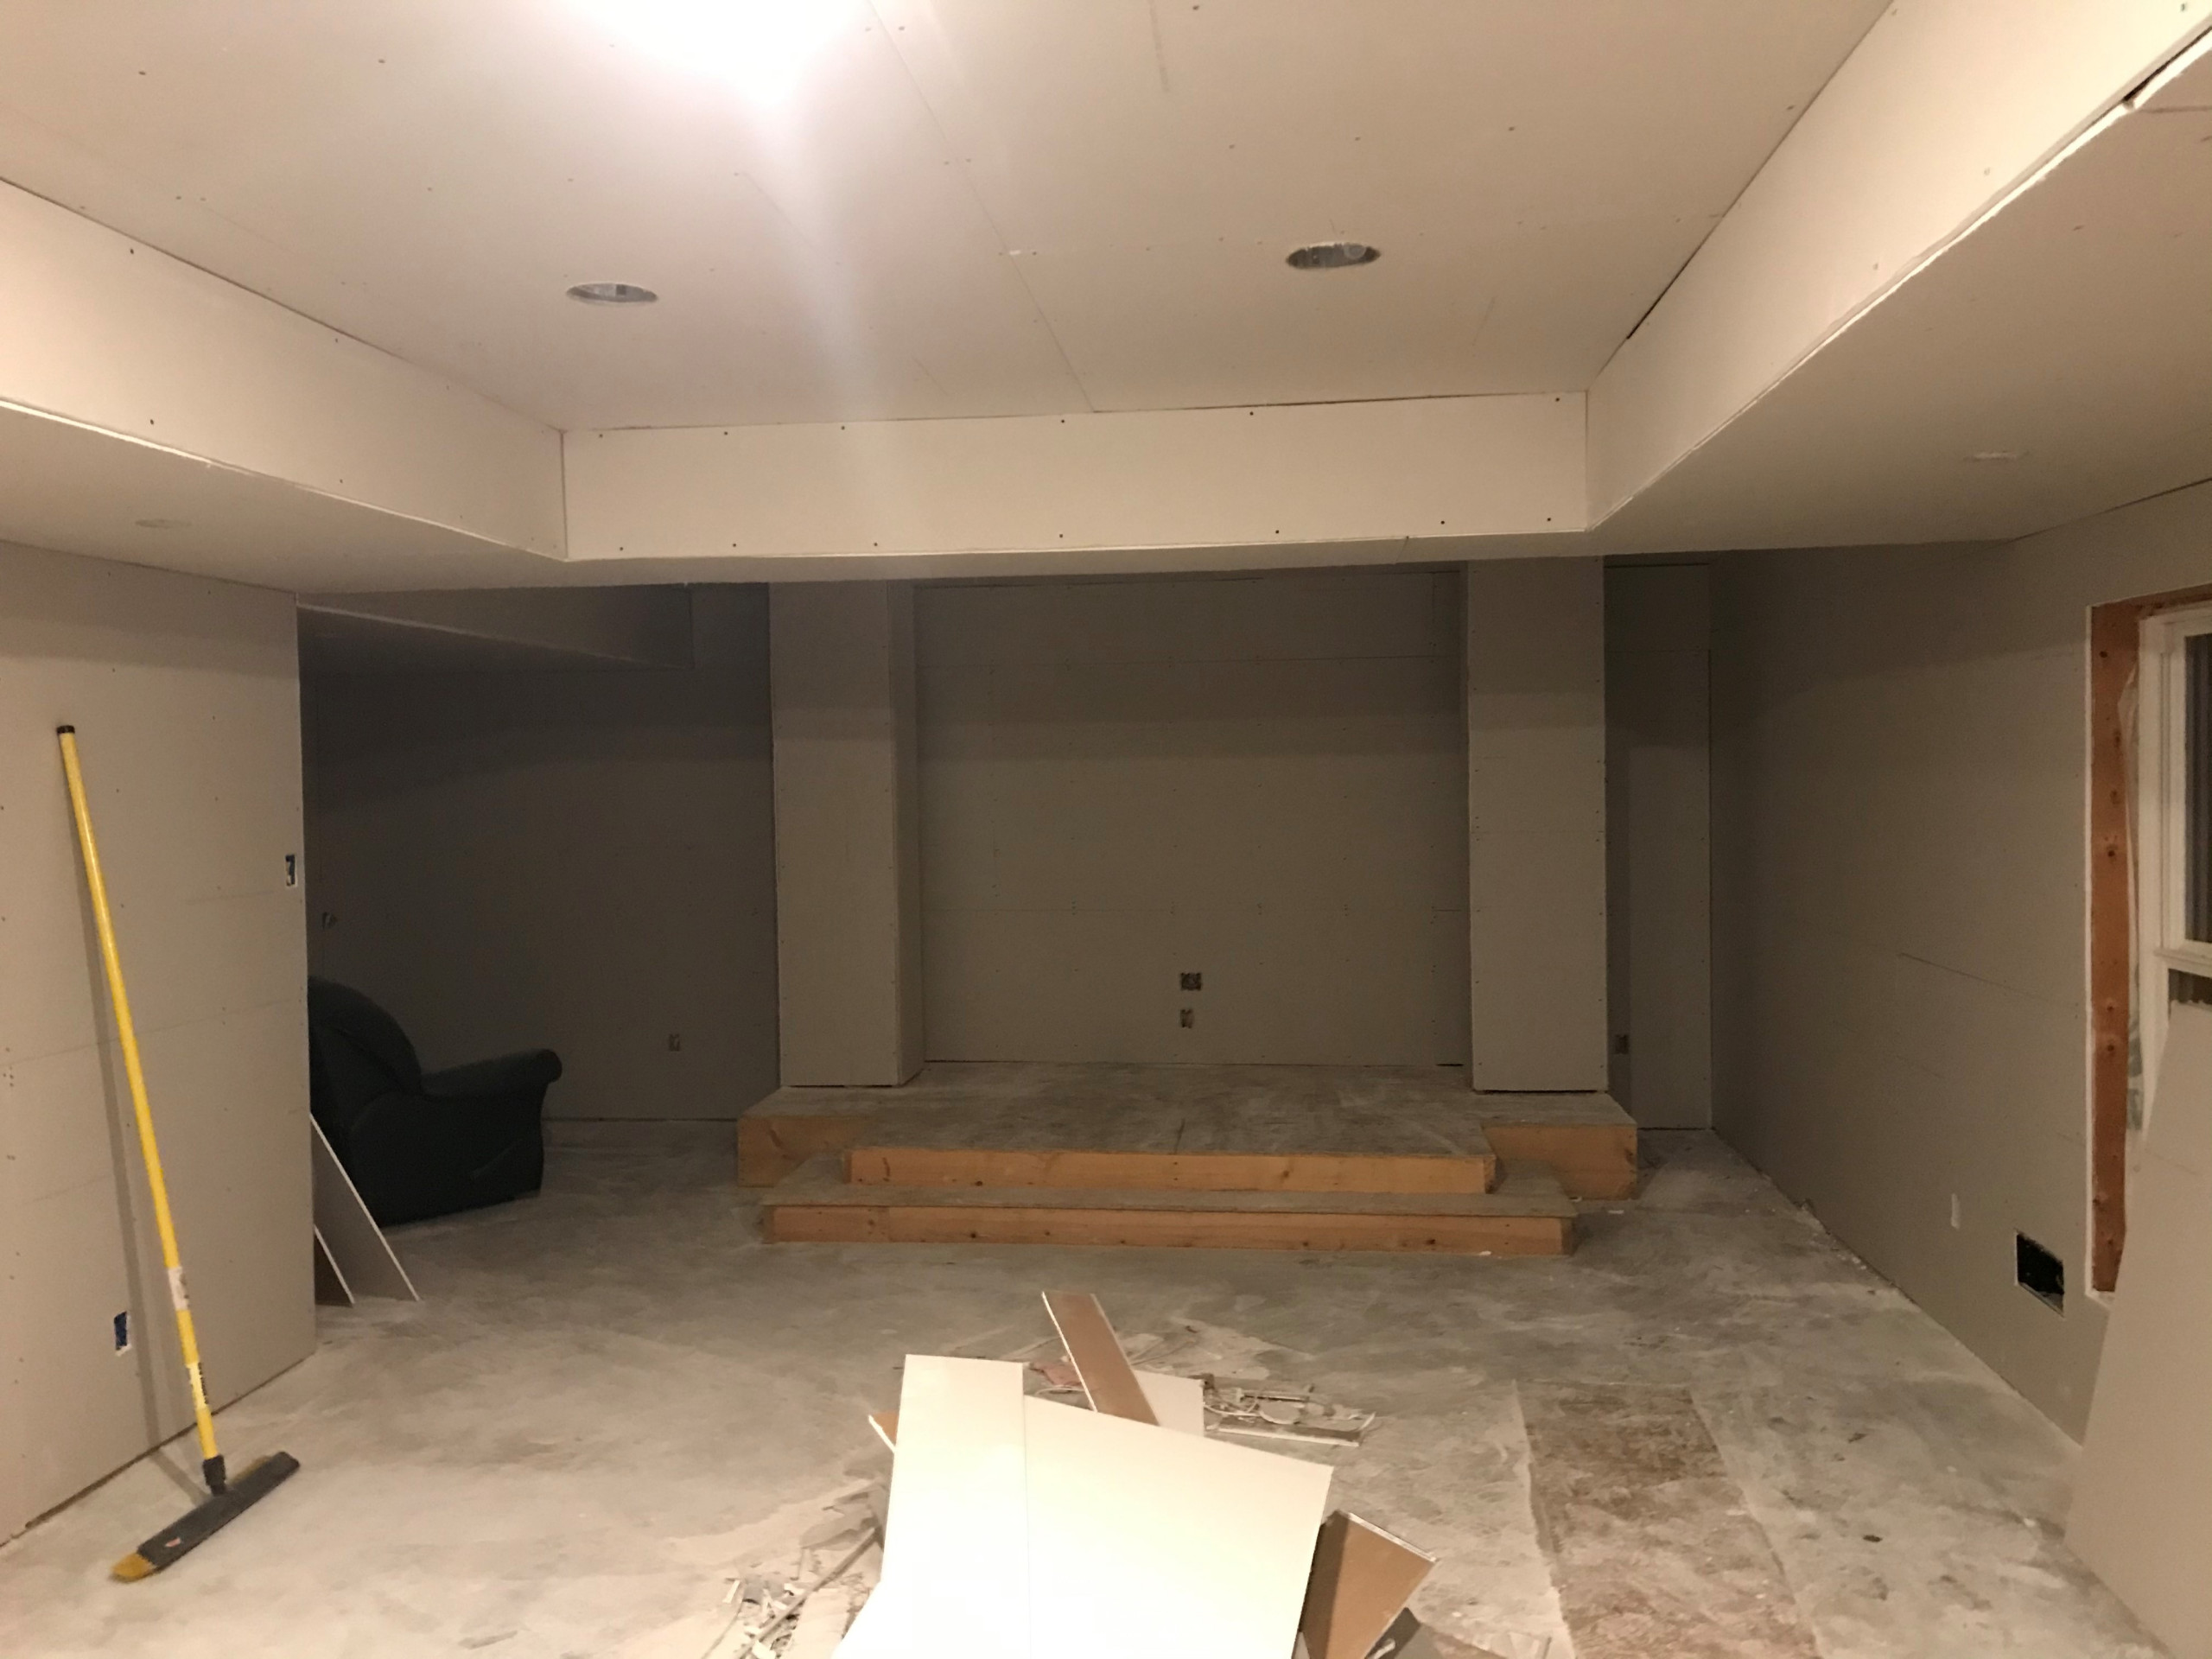 The Stage Area during drywall